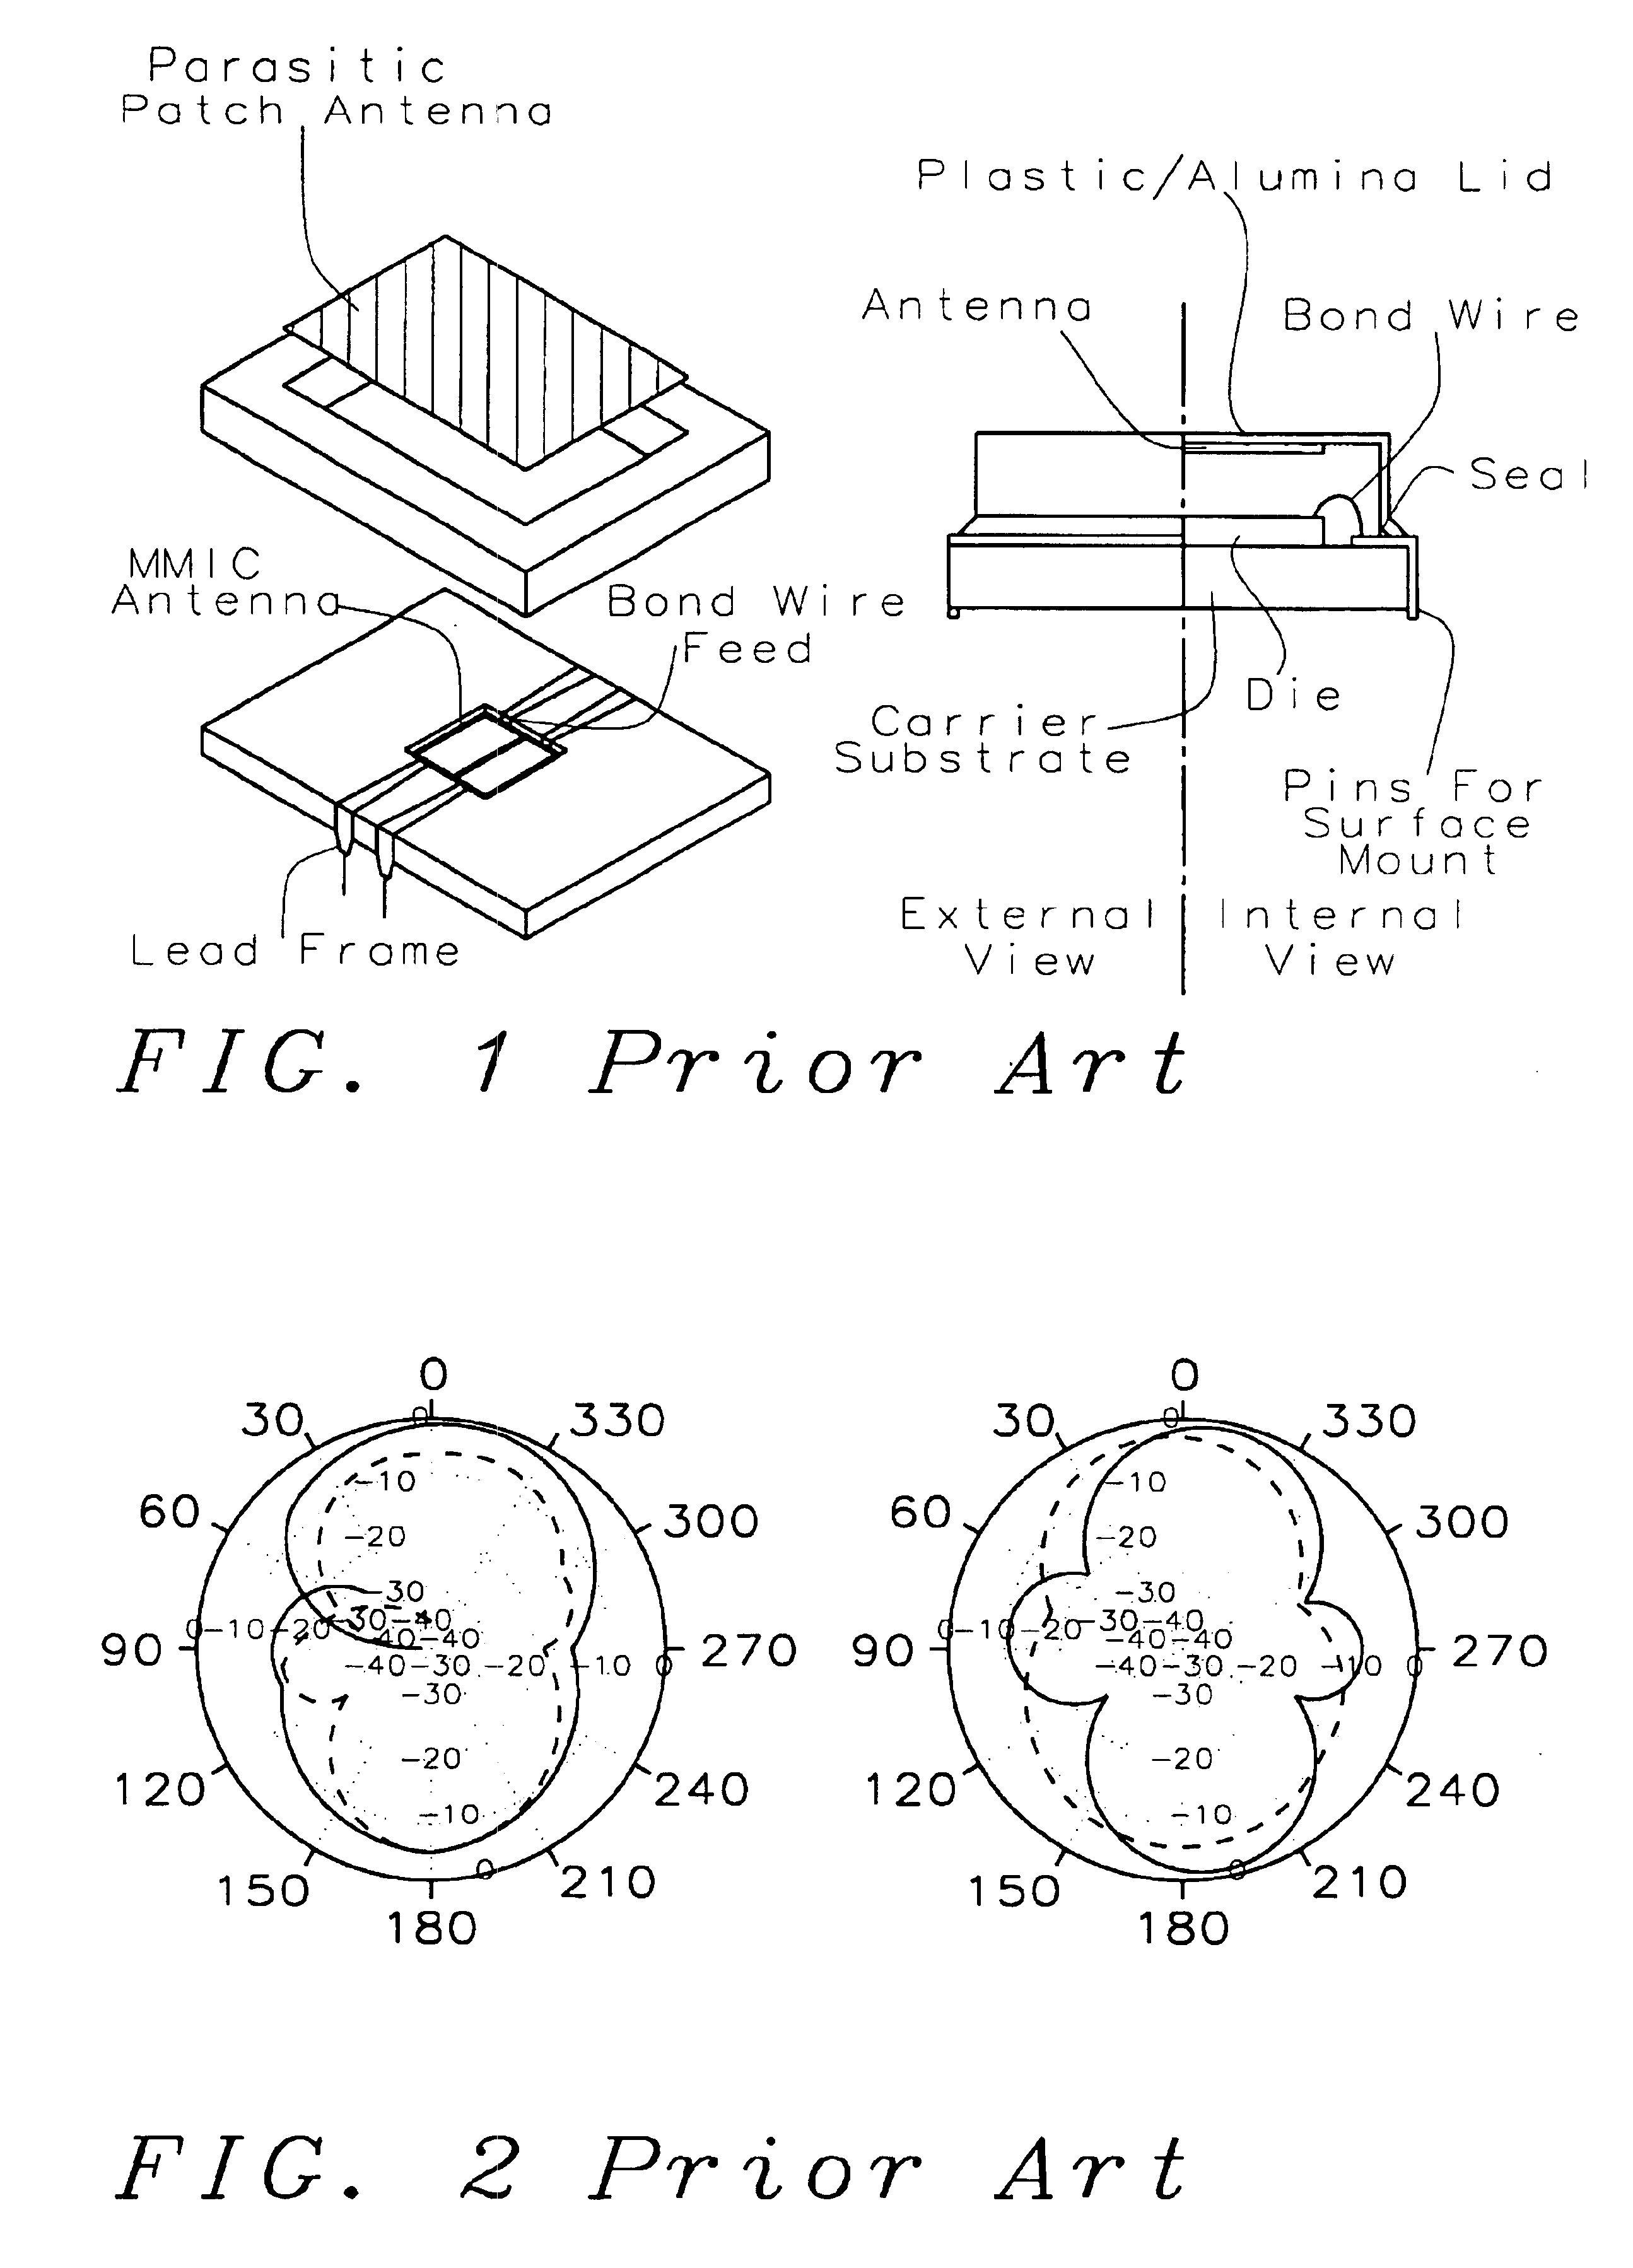 Packaged integrated antenna for circular and linear polarizations